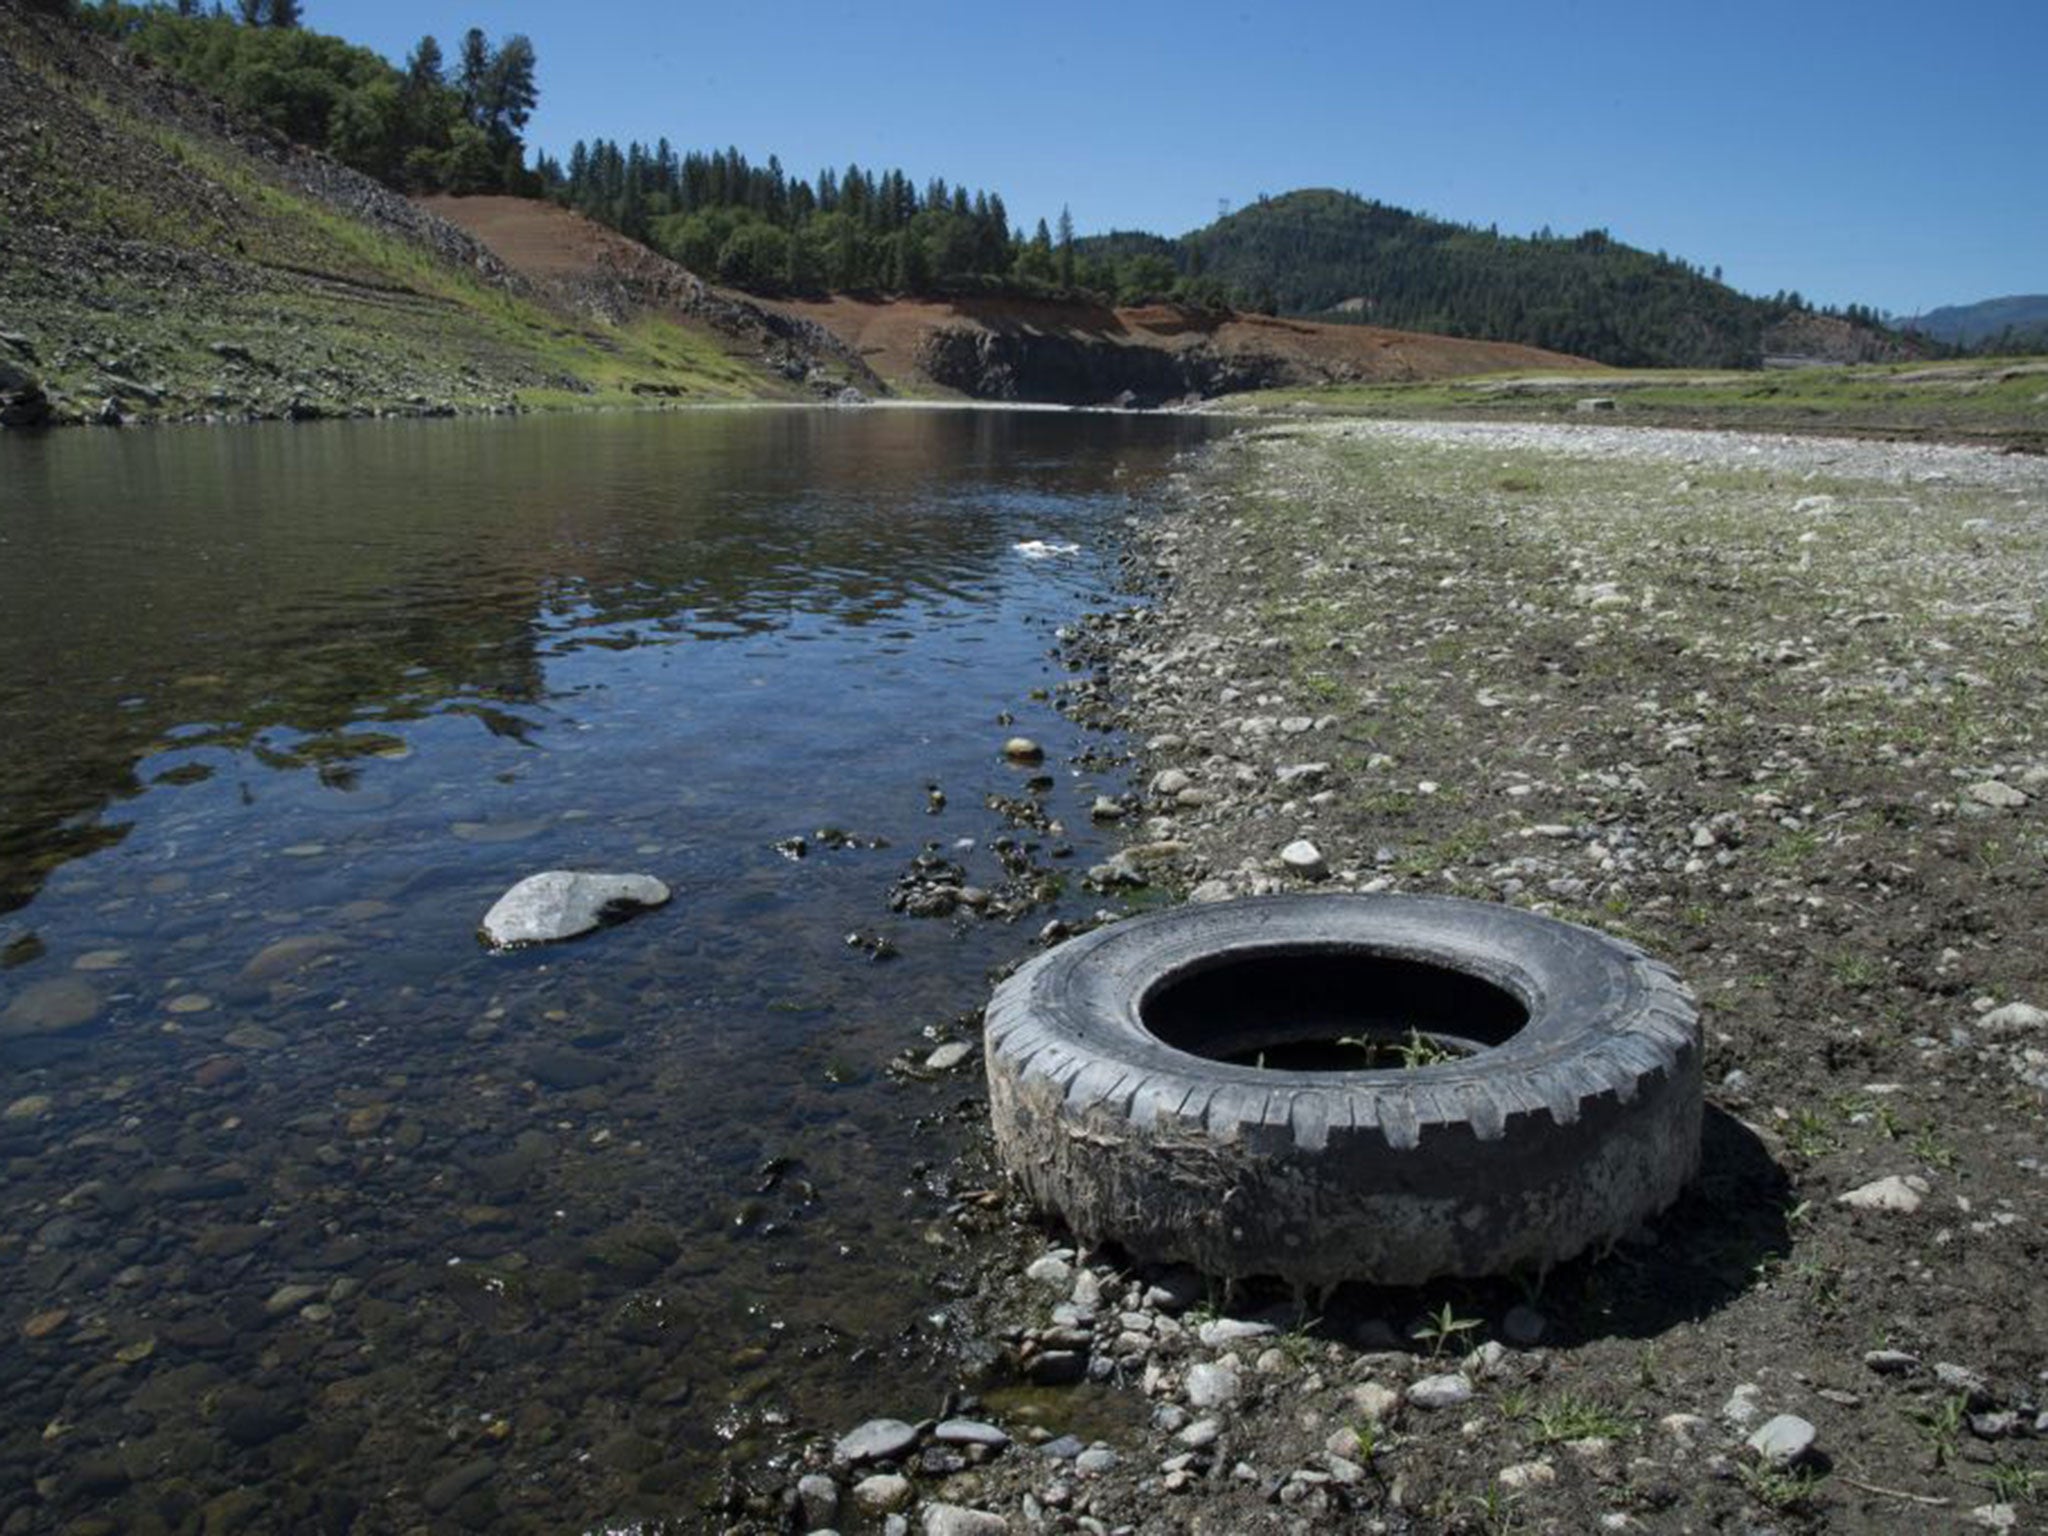 The whole of California is now officially in “severe drought”